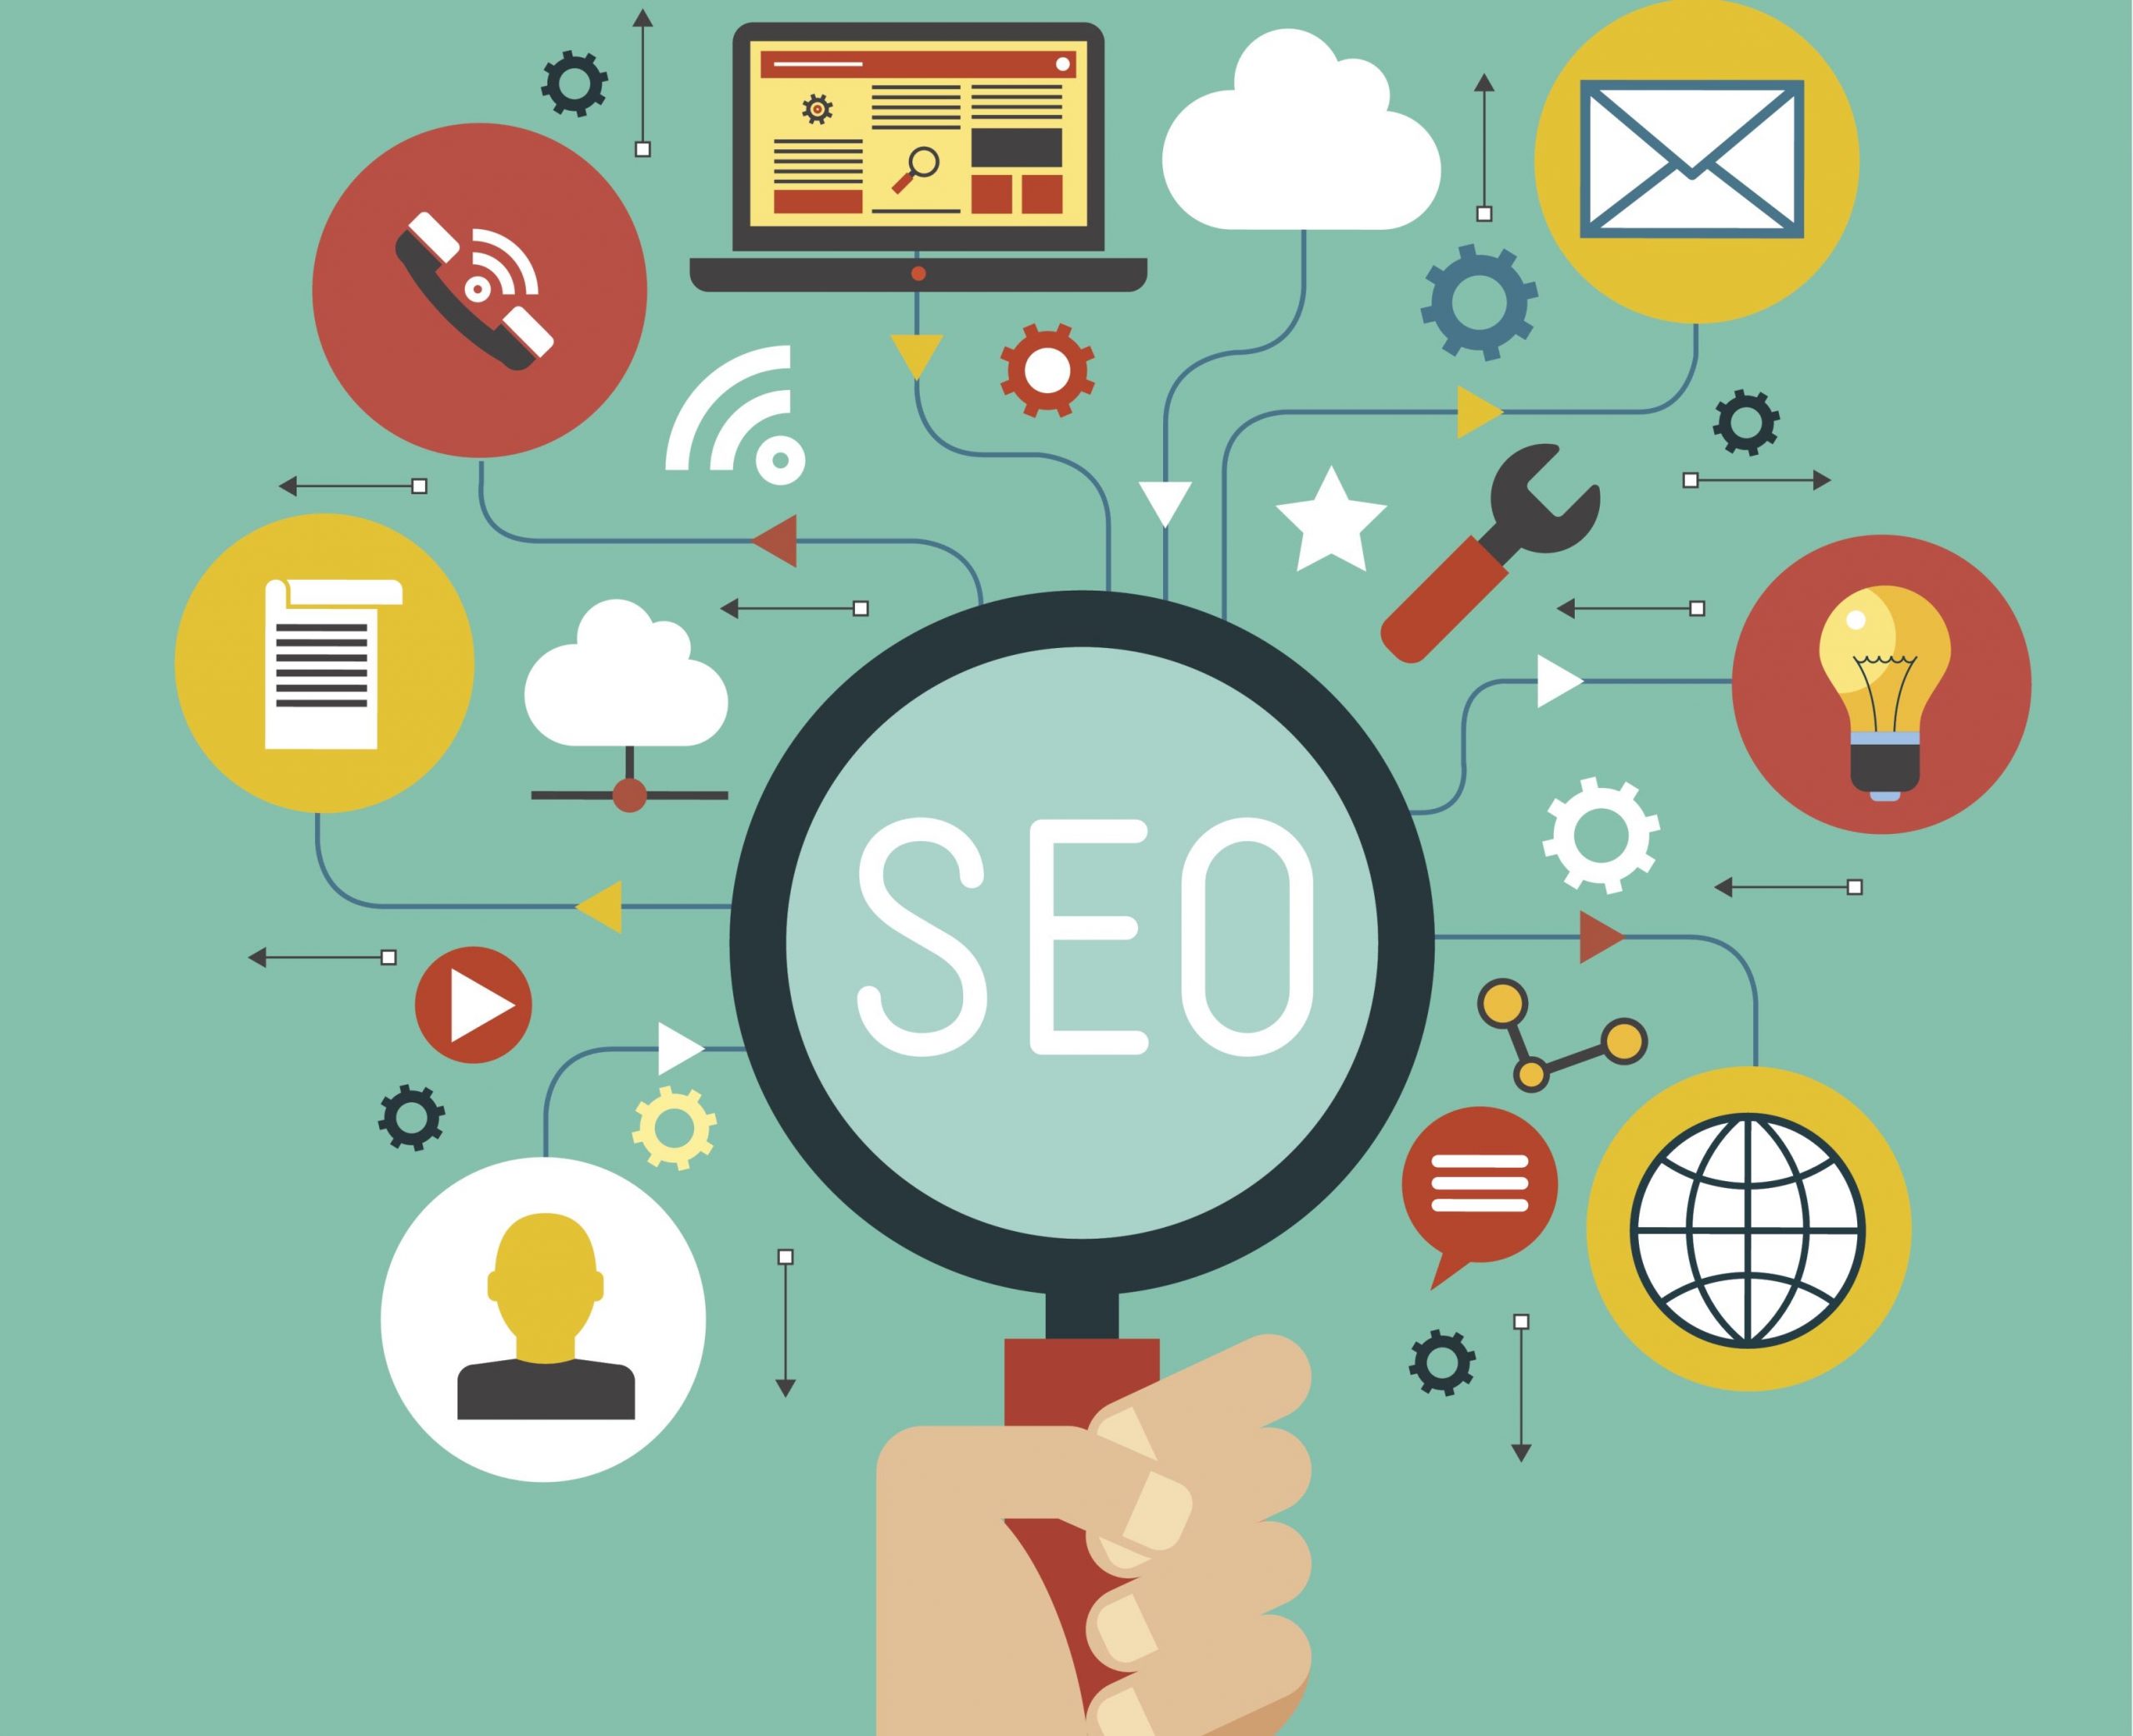 With Our SEO Company, You Can Drive Digital Growth